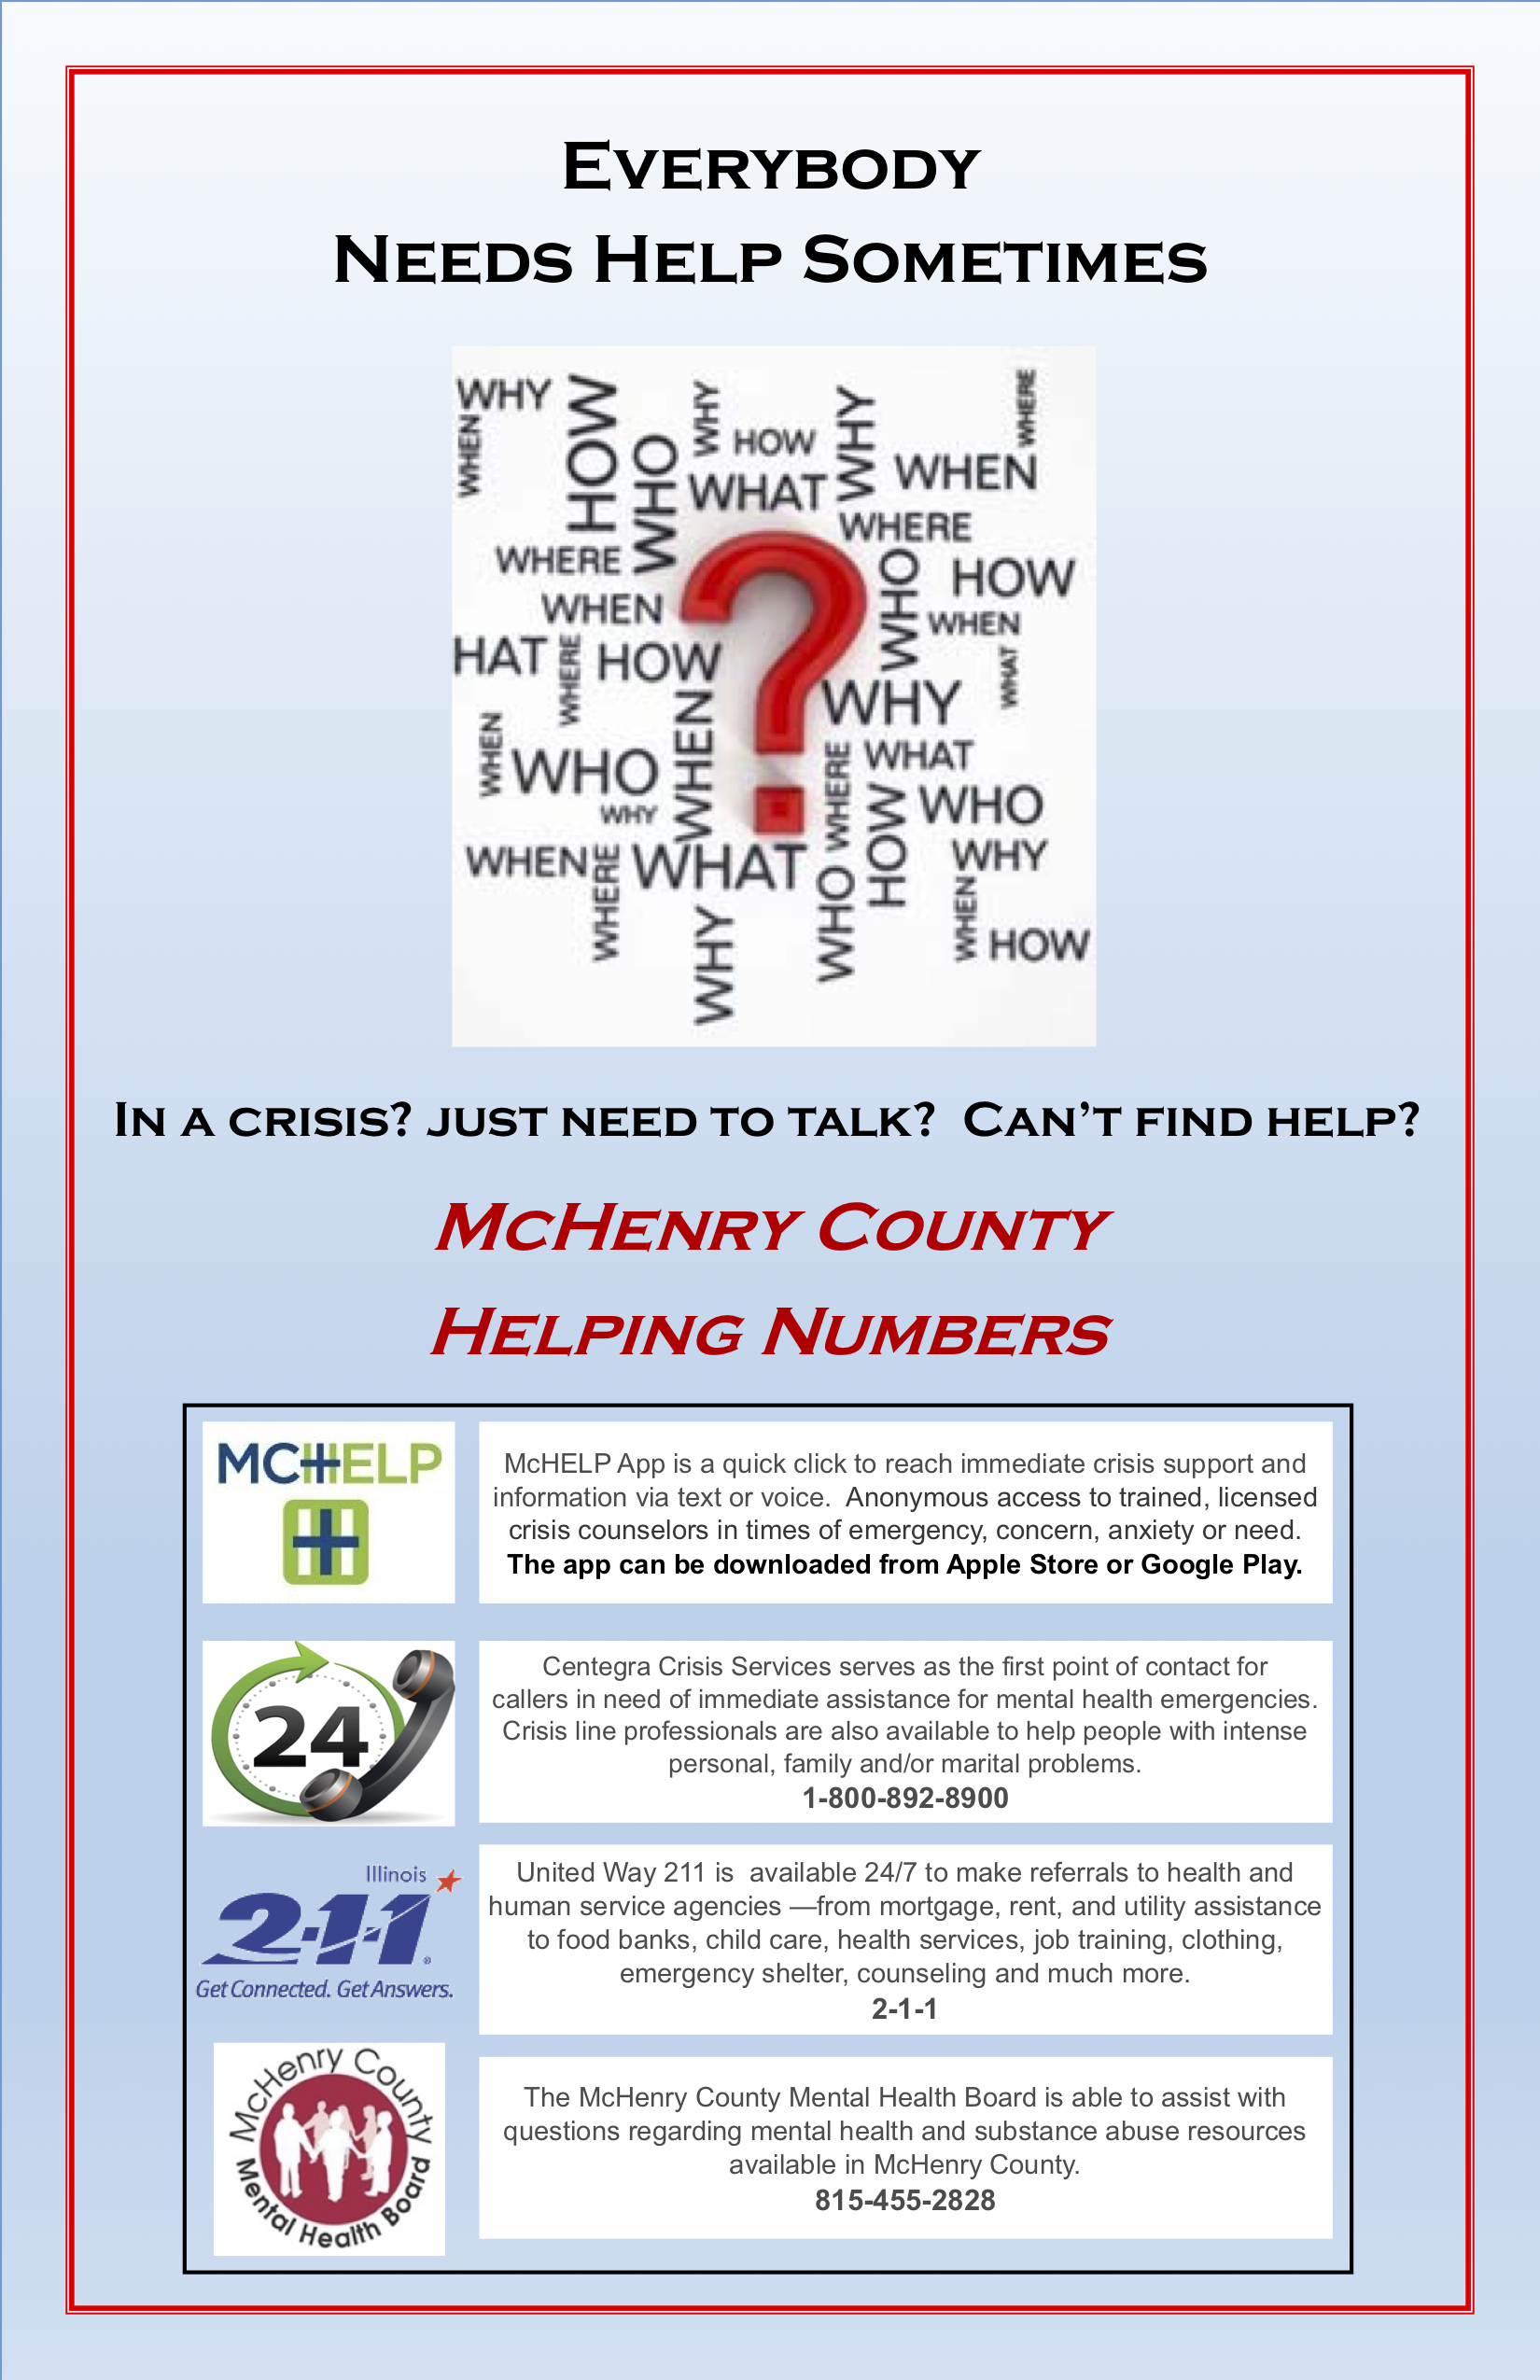 Everybody Needs Help Sometimes, In a Crisis? Just need to talk? Can't find help?, McHenry County Helping Numbers